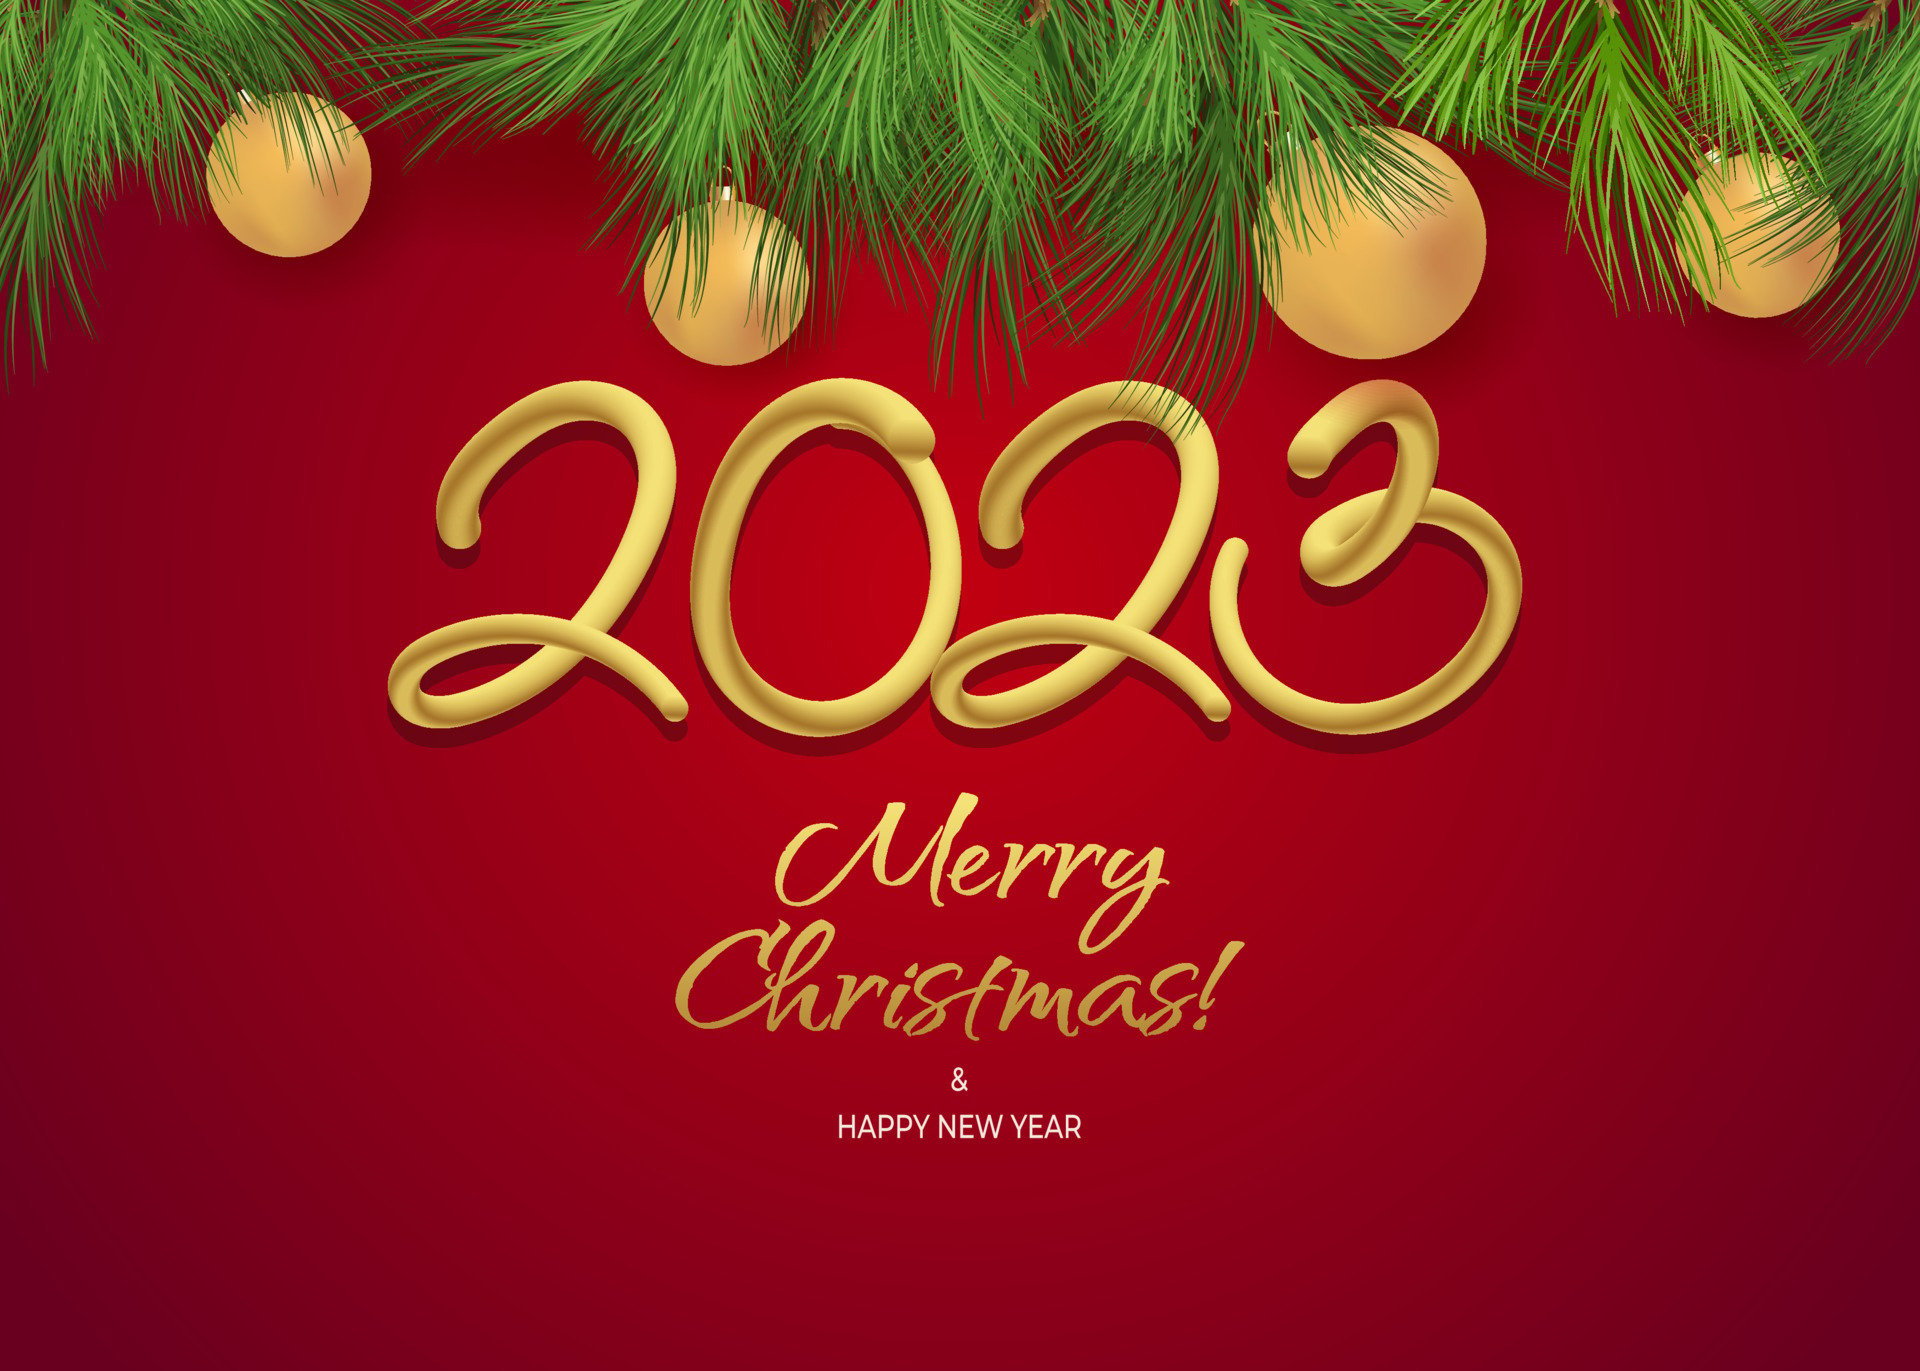 Happy new year 3D 2023 greeting wallpaper vector. Merry Christmas design greeting text with christmas decor elements such as a fir tree branch with balls on a red background with luxury